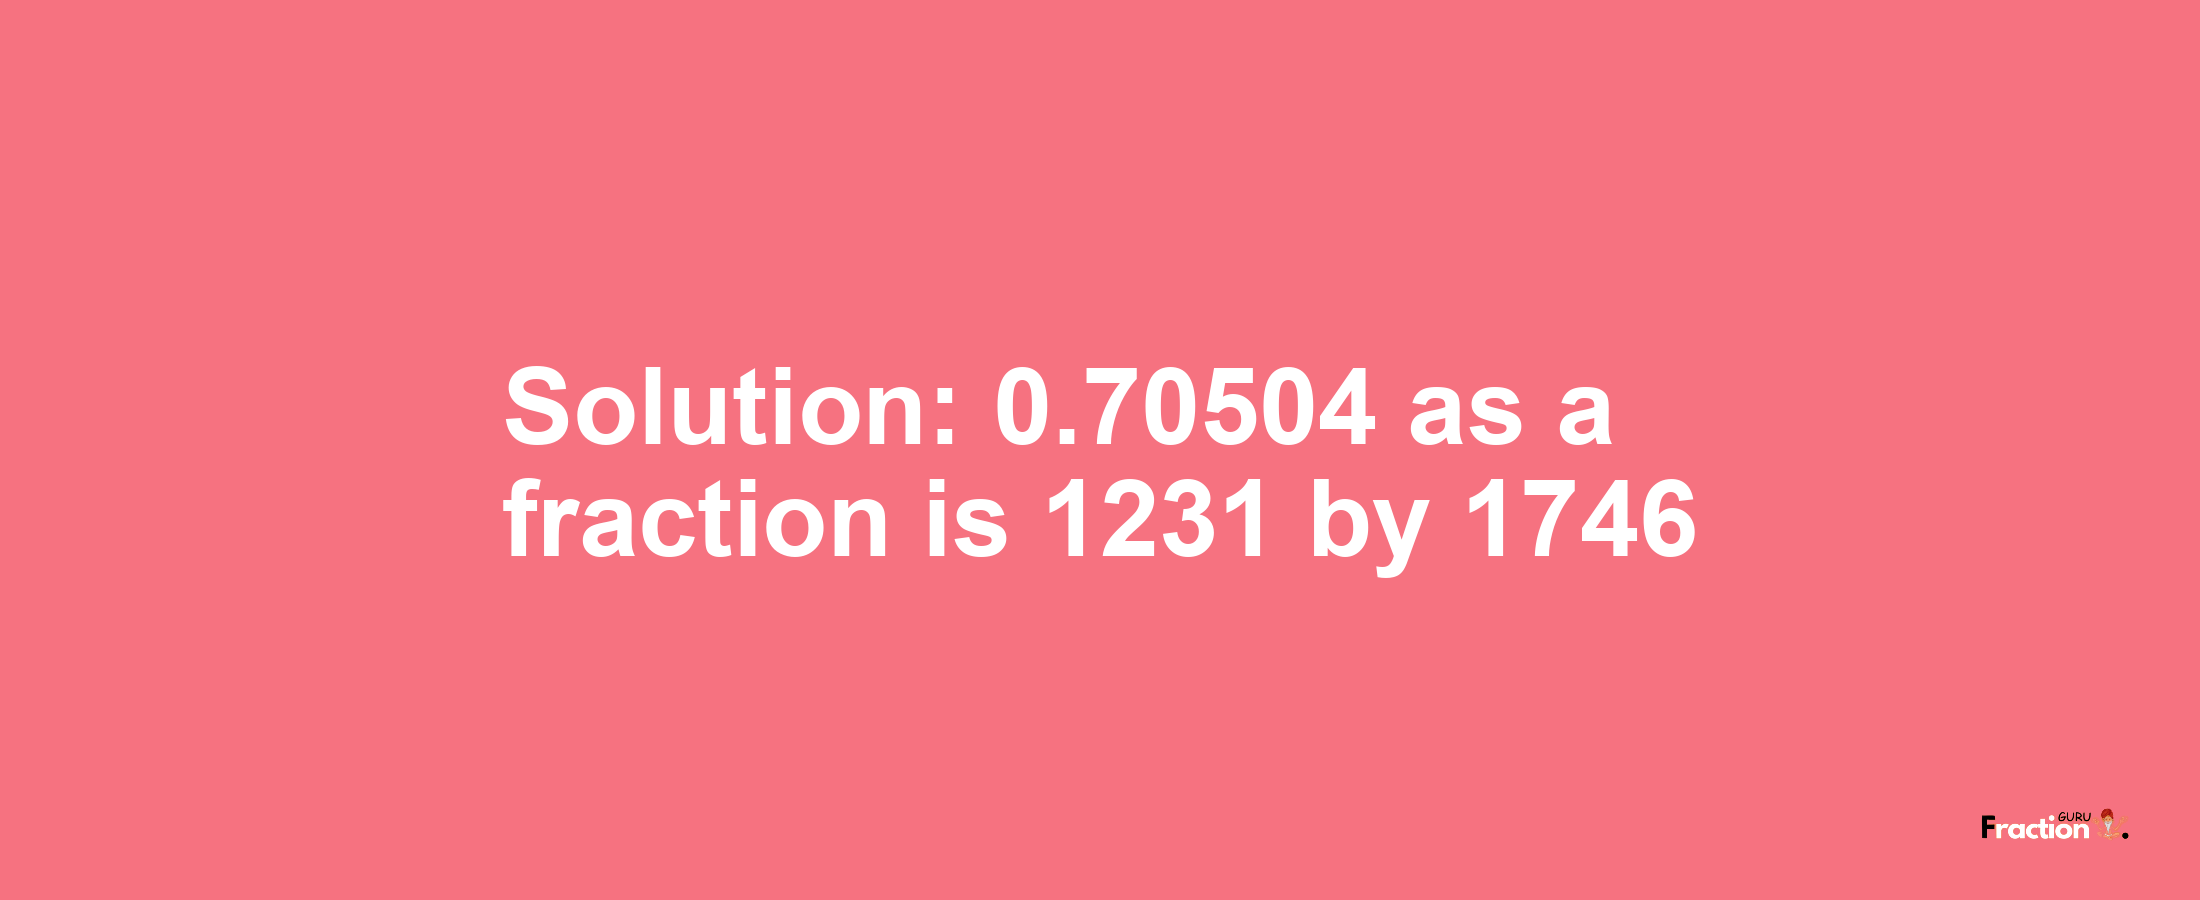 Solution:0.70504 as a fraction is 1231/1746